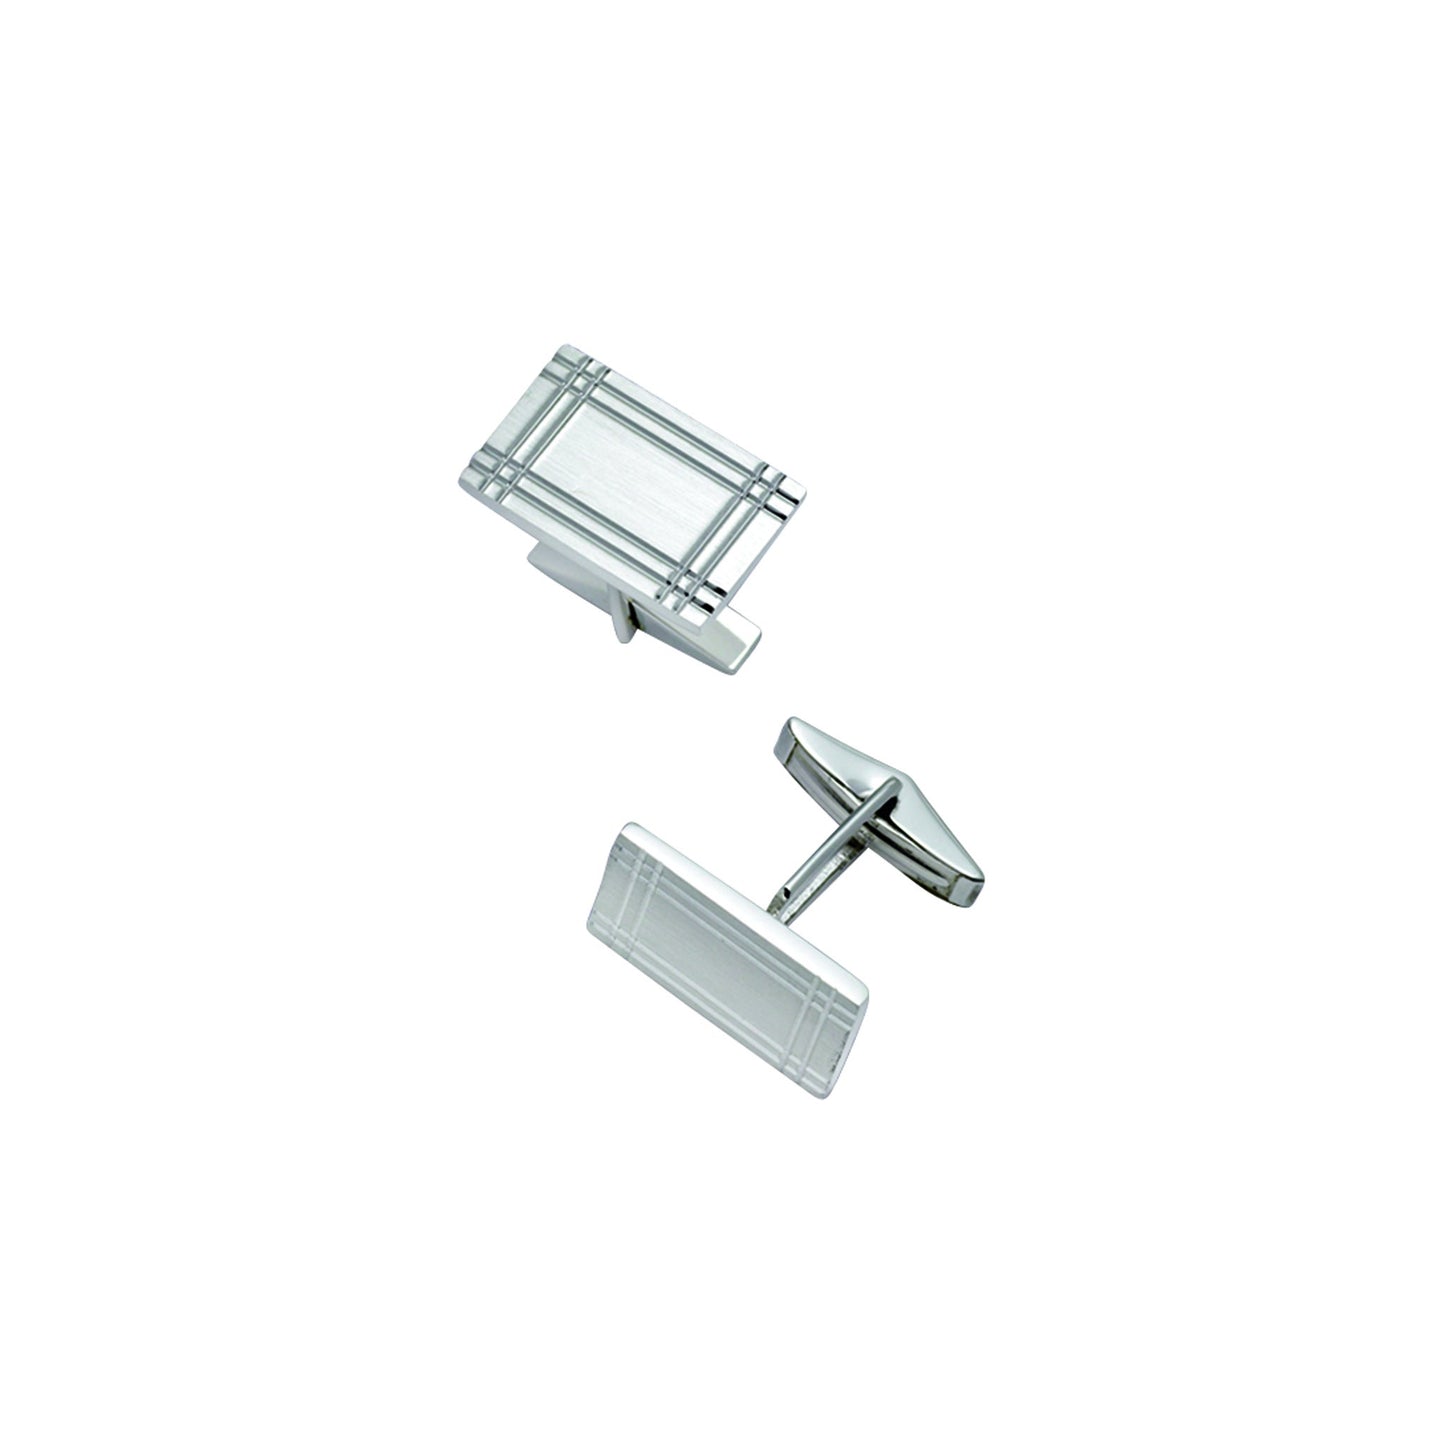 A sterling silver rectangle cufflinks with plaid design displayed on a neutral white background.